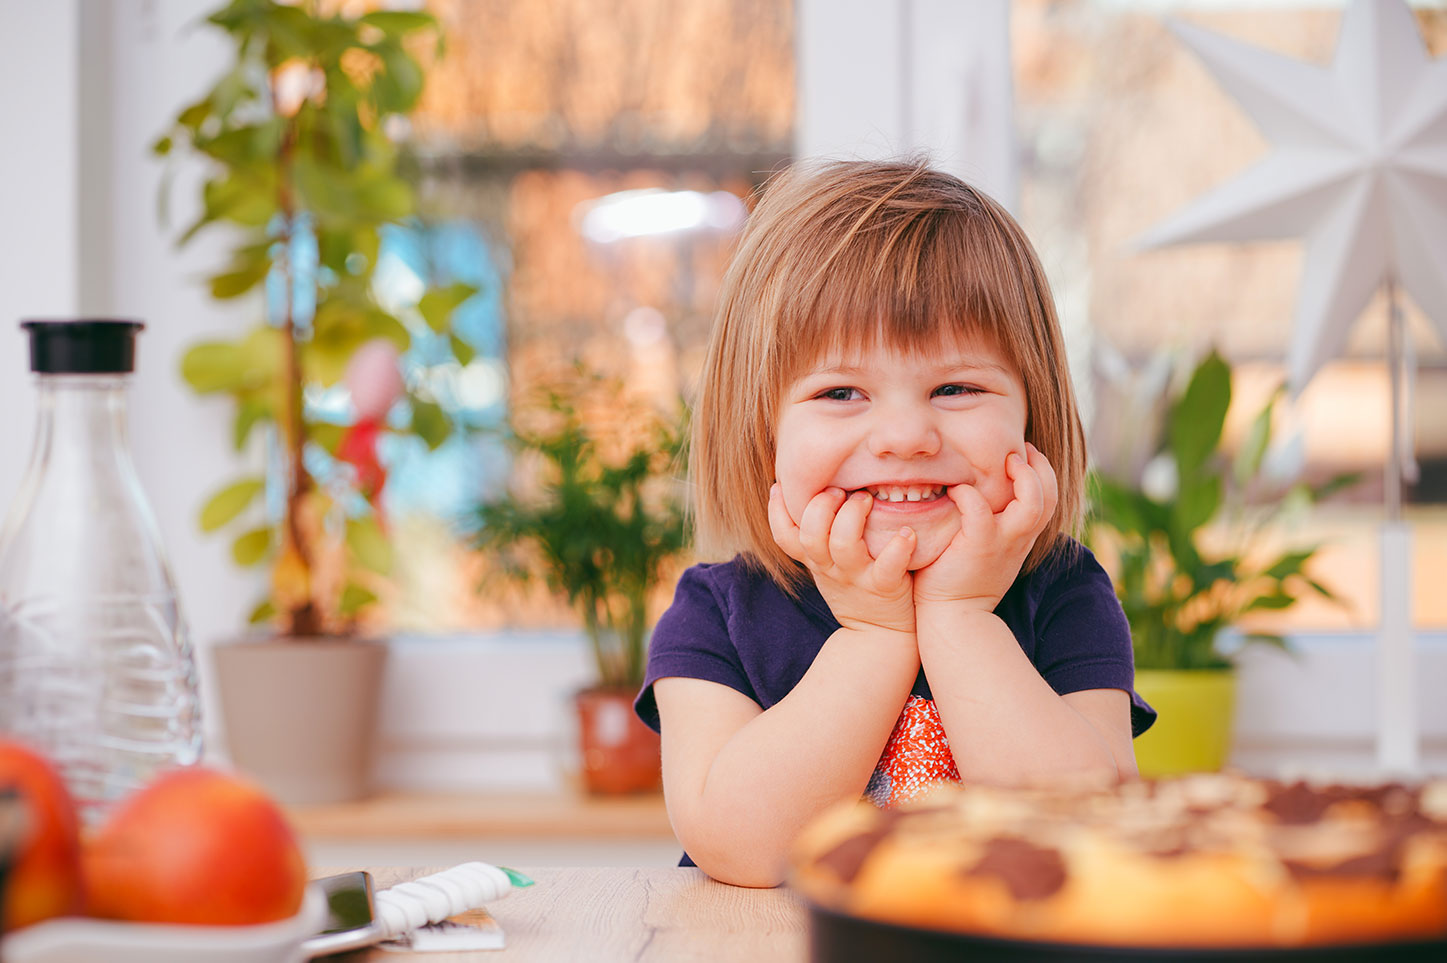 smiling toddler in kitchen with blurred pizza